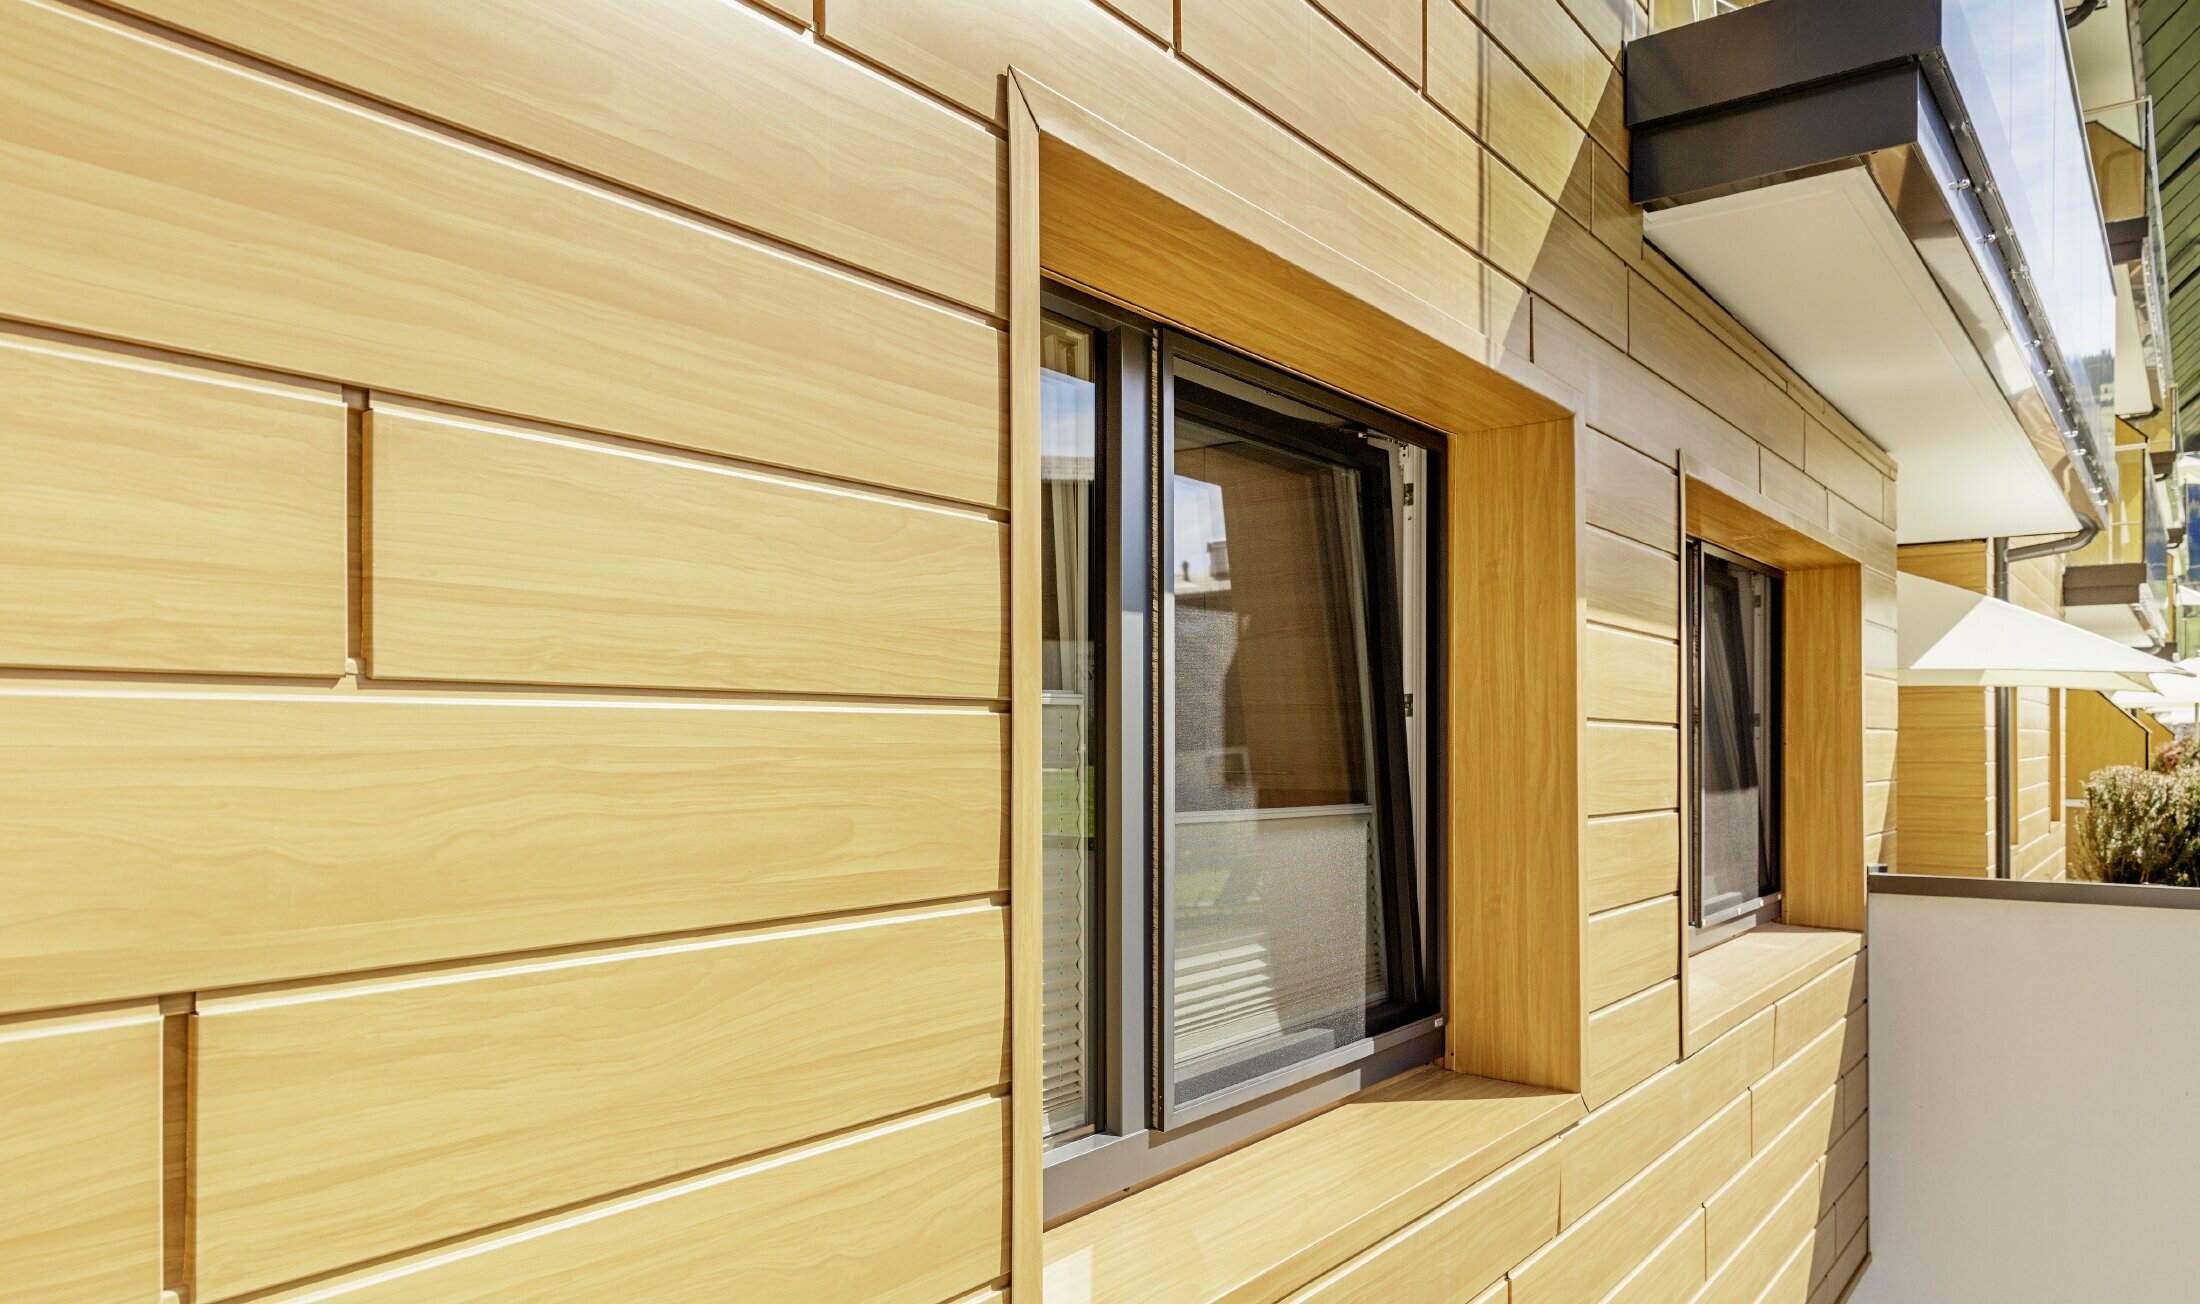 Detailed close up of a window surround with PREFA sidings in a wood finish at the Guthof Lutz in Schattwald.